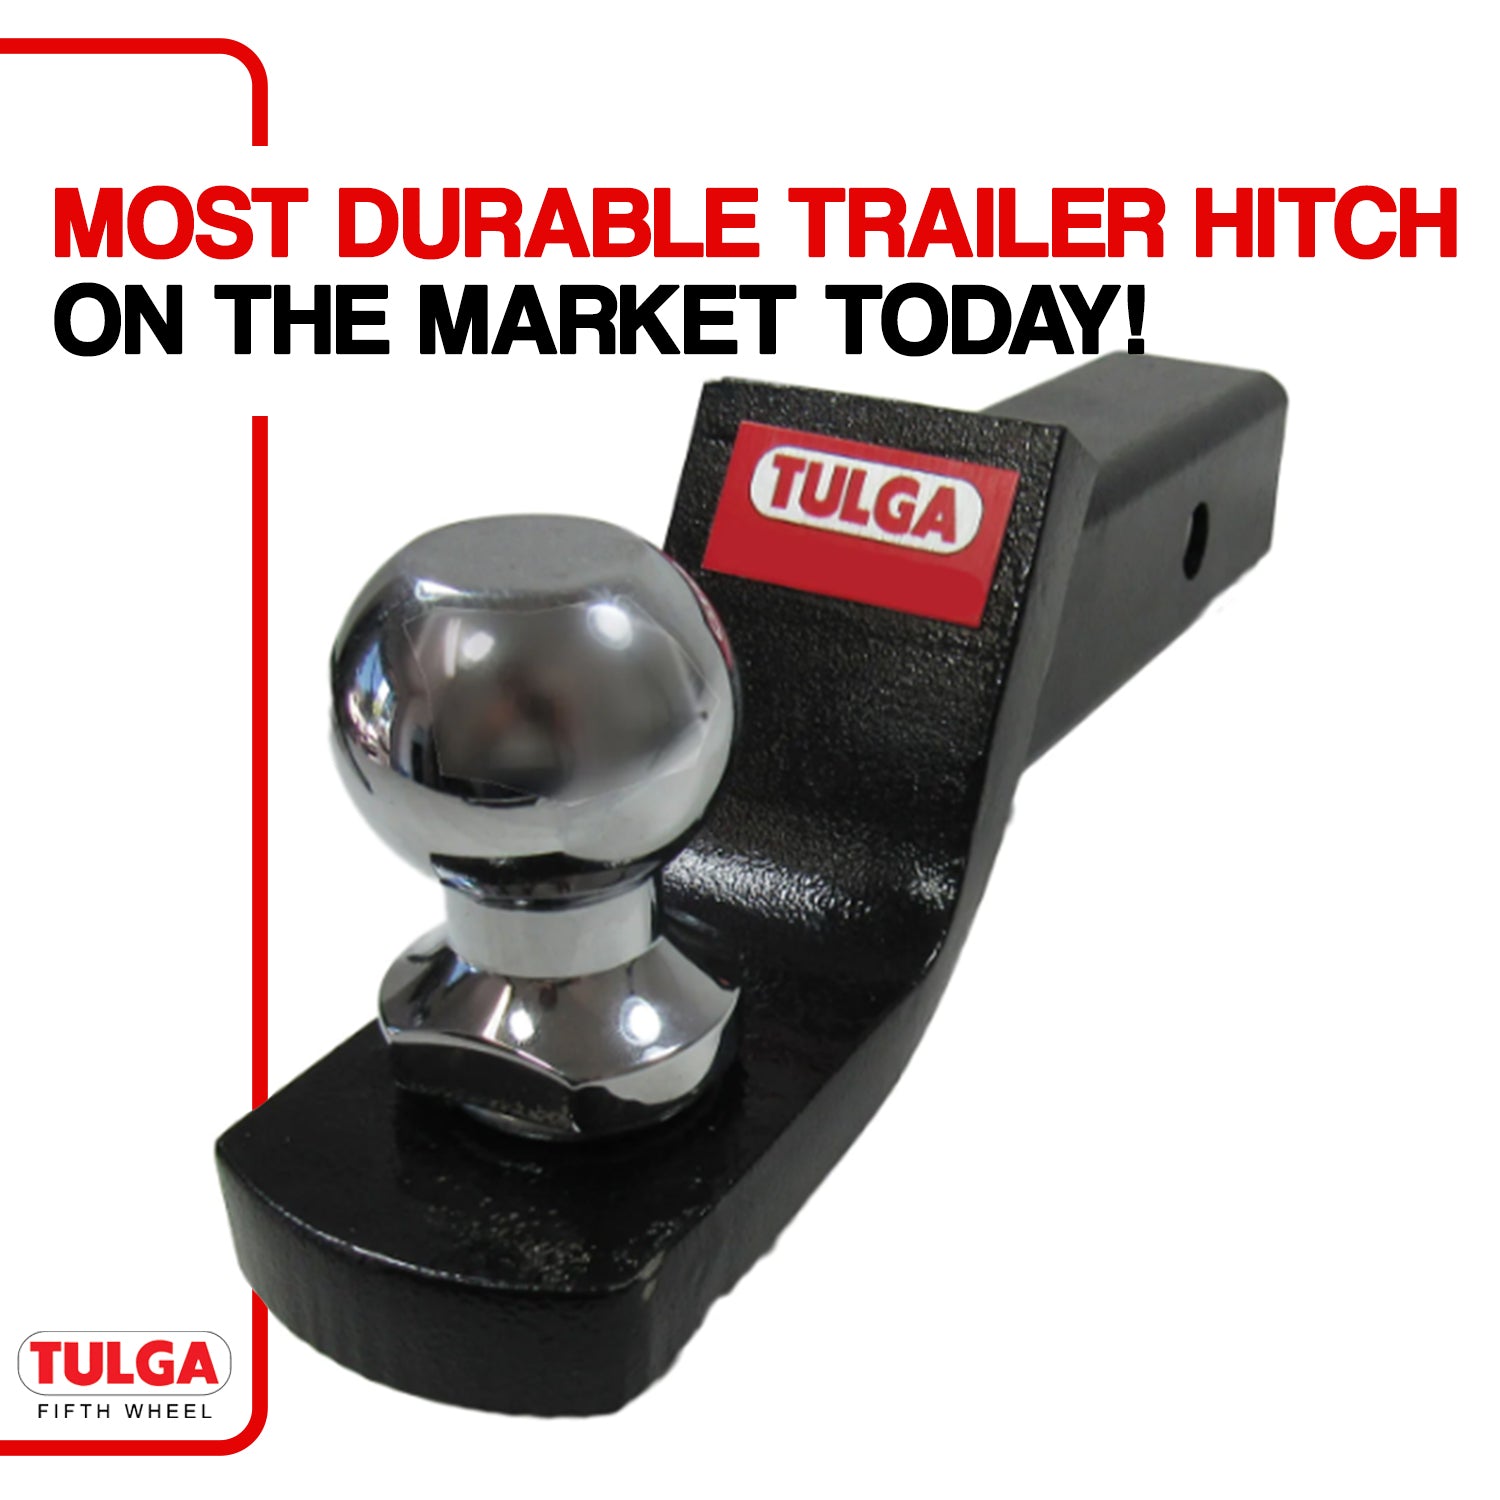 Most durable trailer hitch on the market today!